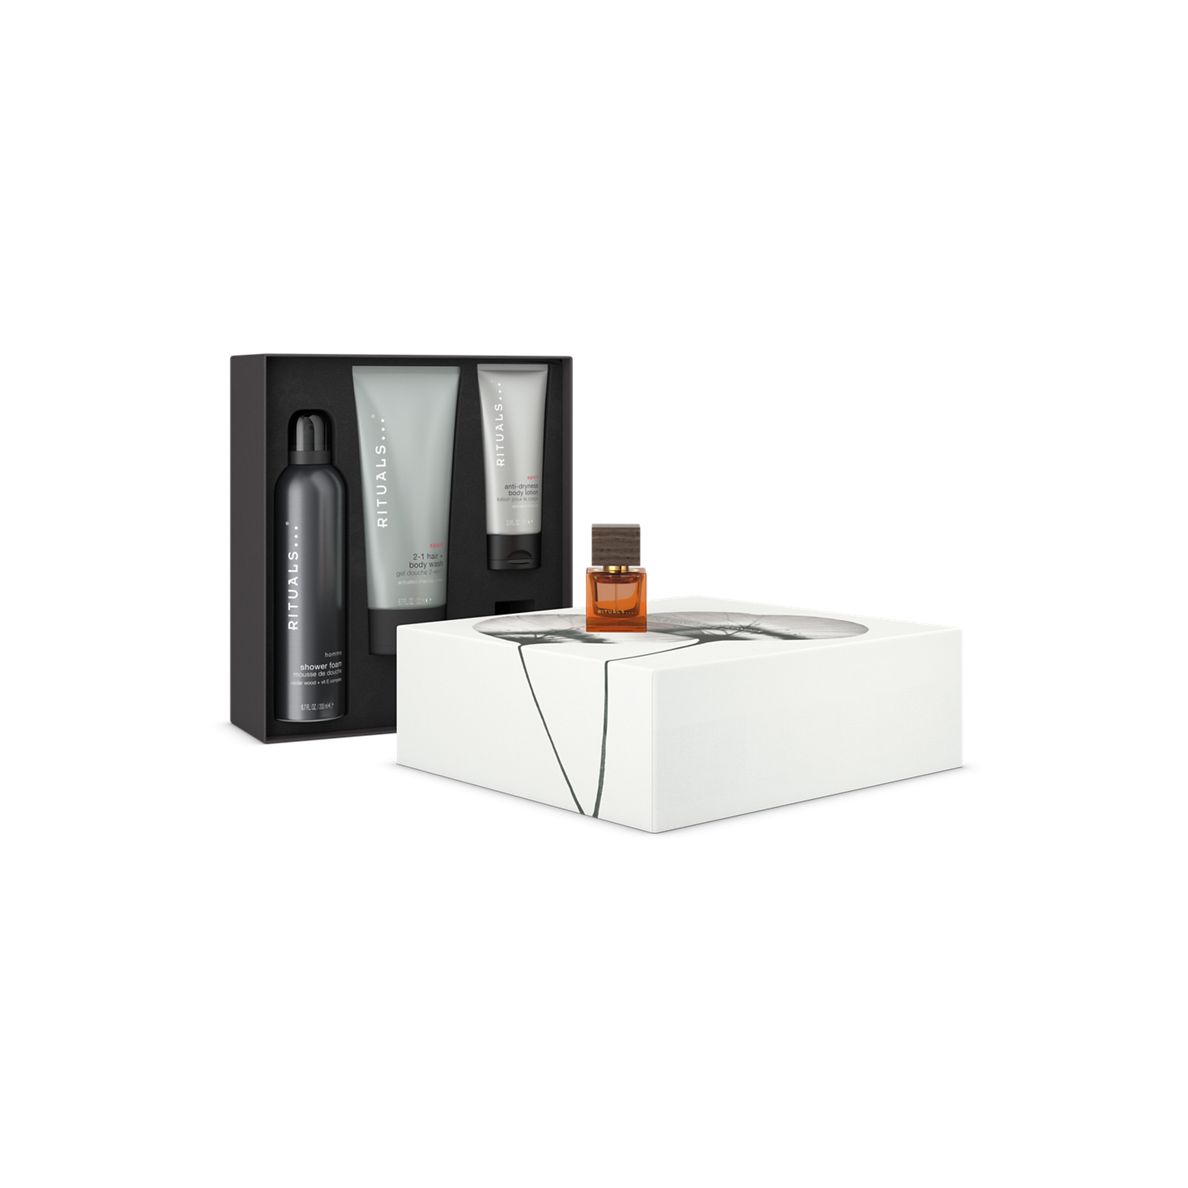 https://rituals.scene7.com/is/image/rituals/1116622-rituals-homme-giftset-m-pack-open-inlay:Square?resMode=sharp2&wid=1188&hei=1188